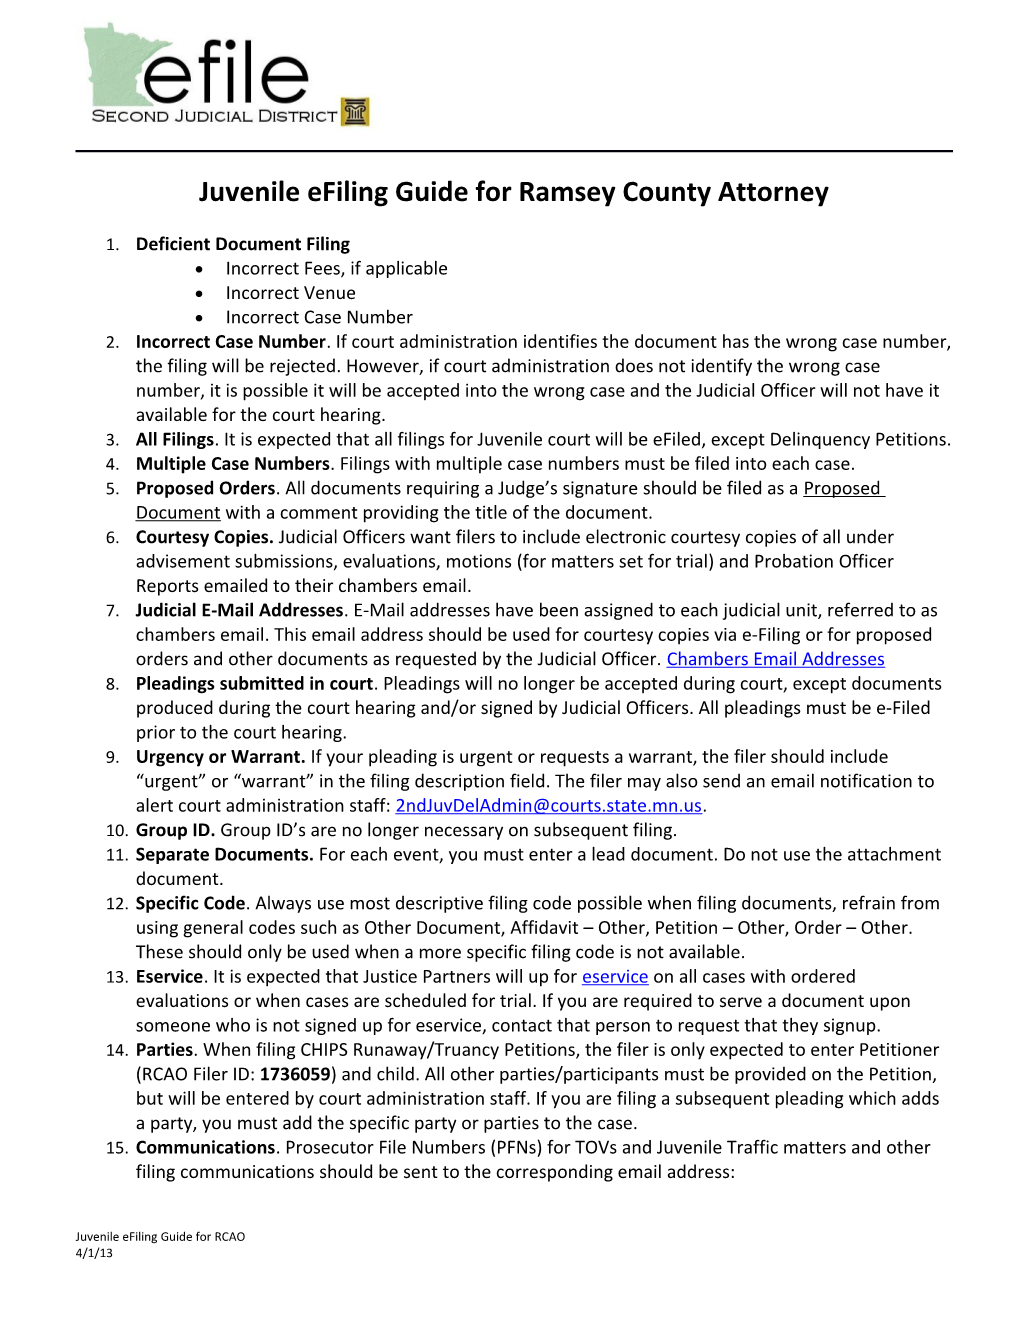 Juvenile Efiling Guide for Ramsey County Attorney